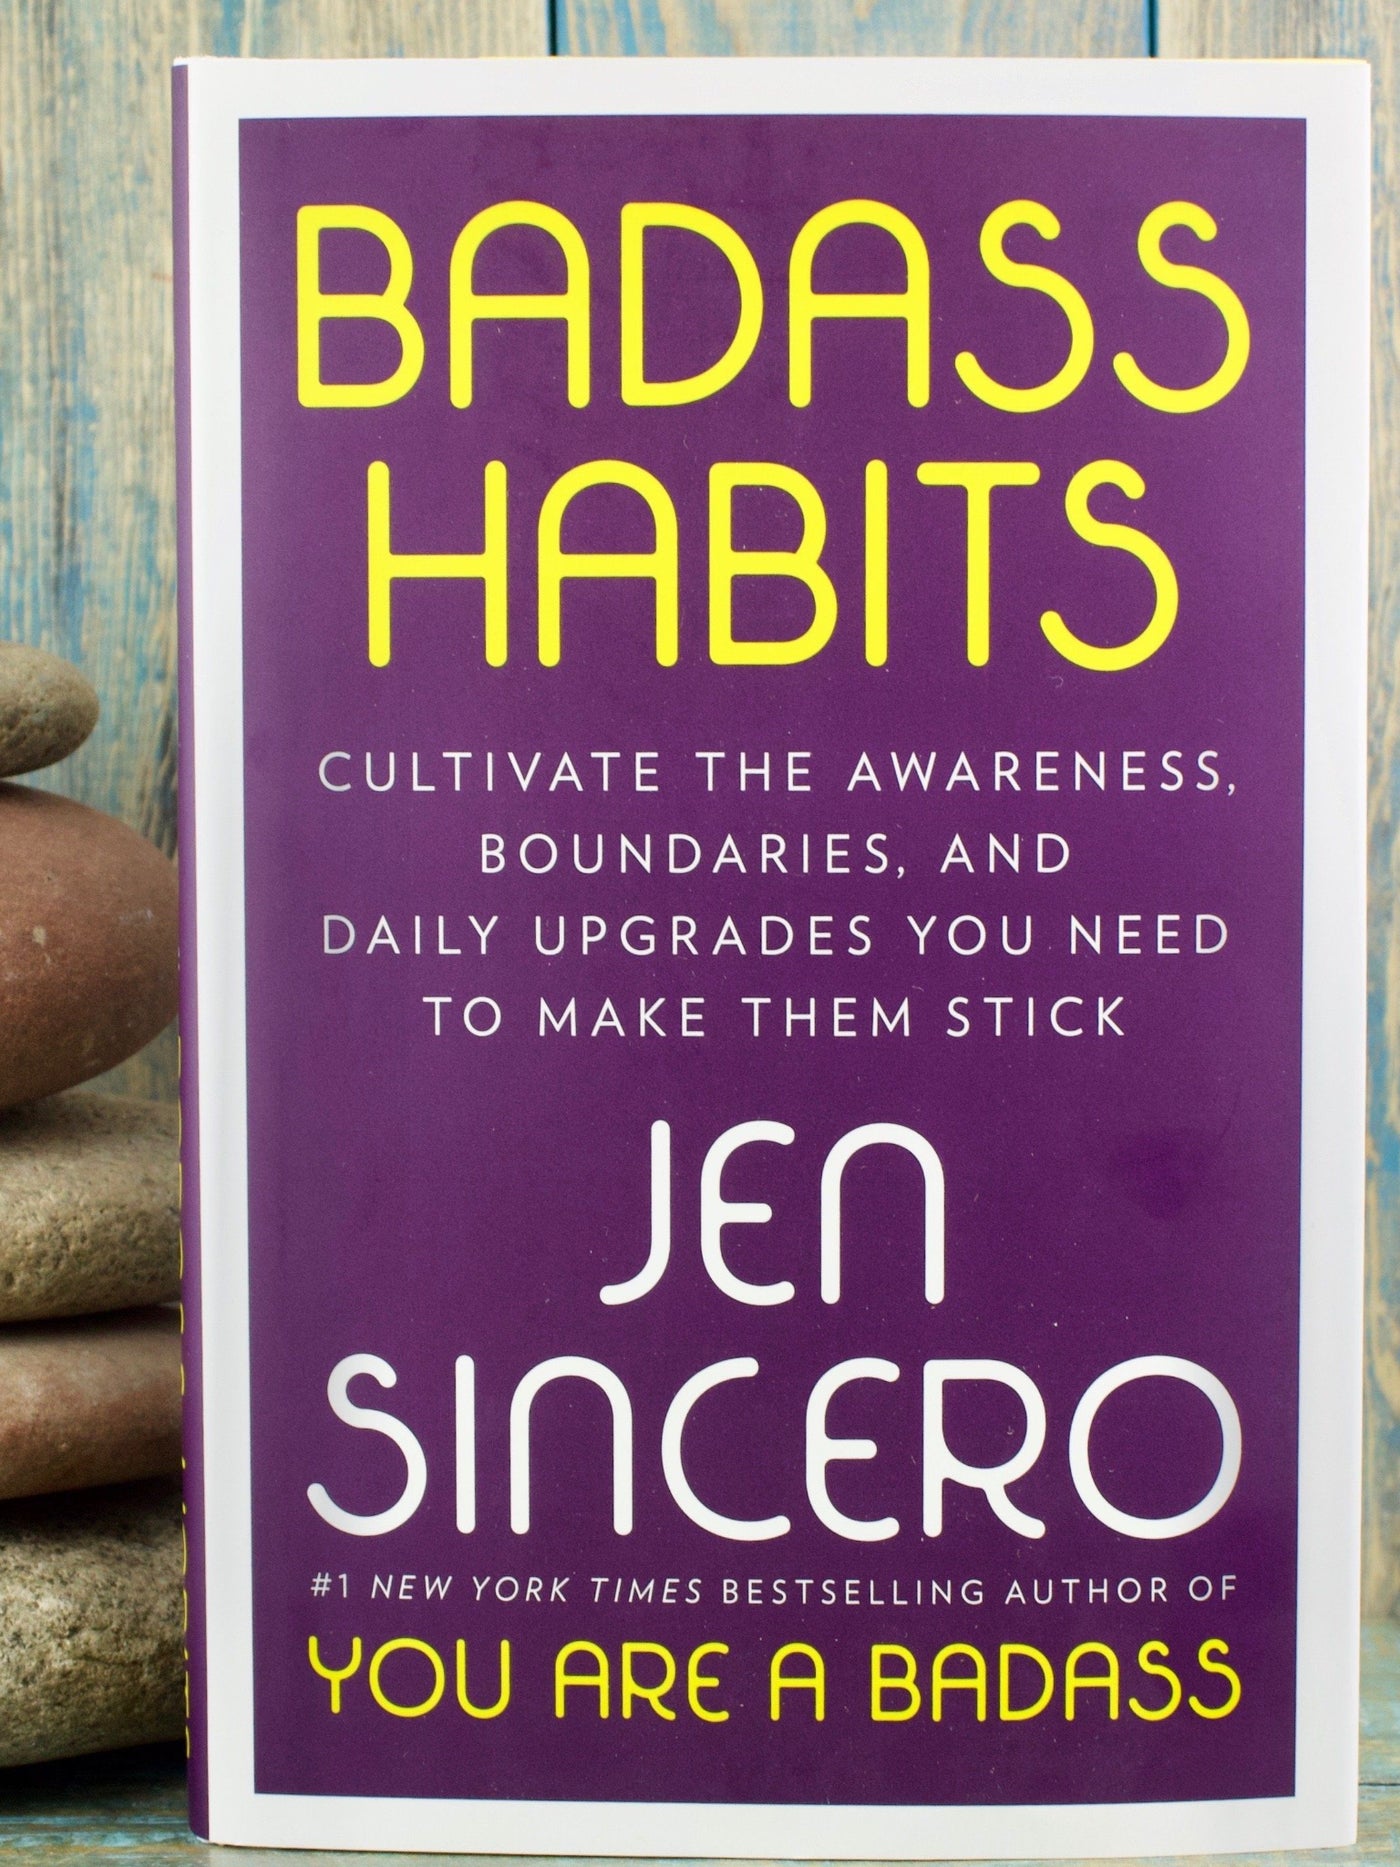 Badass Habits: Cultivate the Awareness, Boundaries, and Daily Upgrades You Need to Make Them Stick